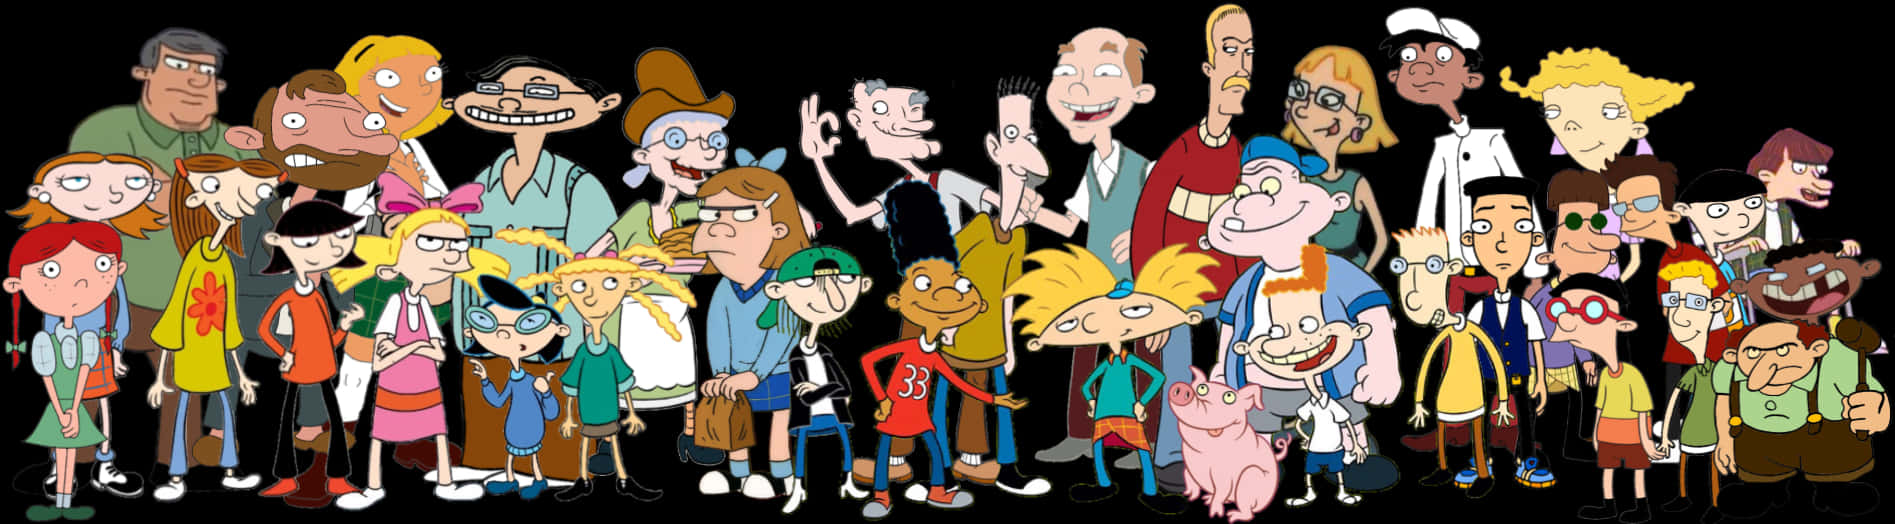 Hey Arnold Characters Lineup PNG